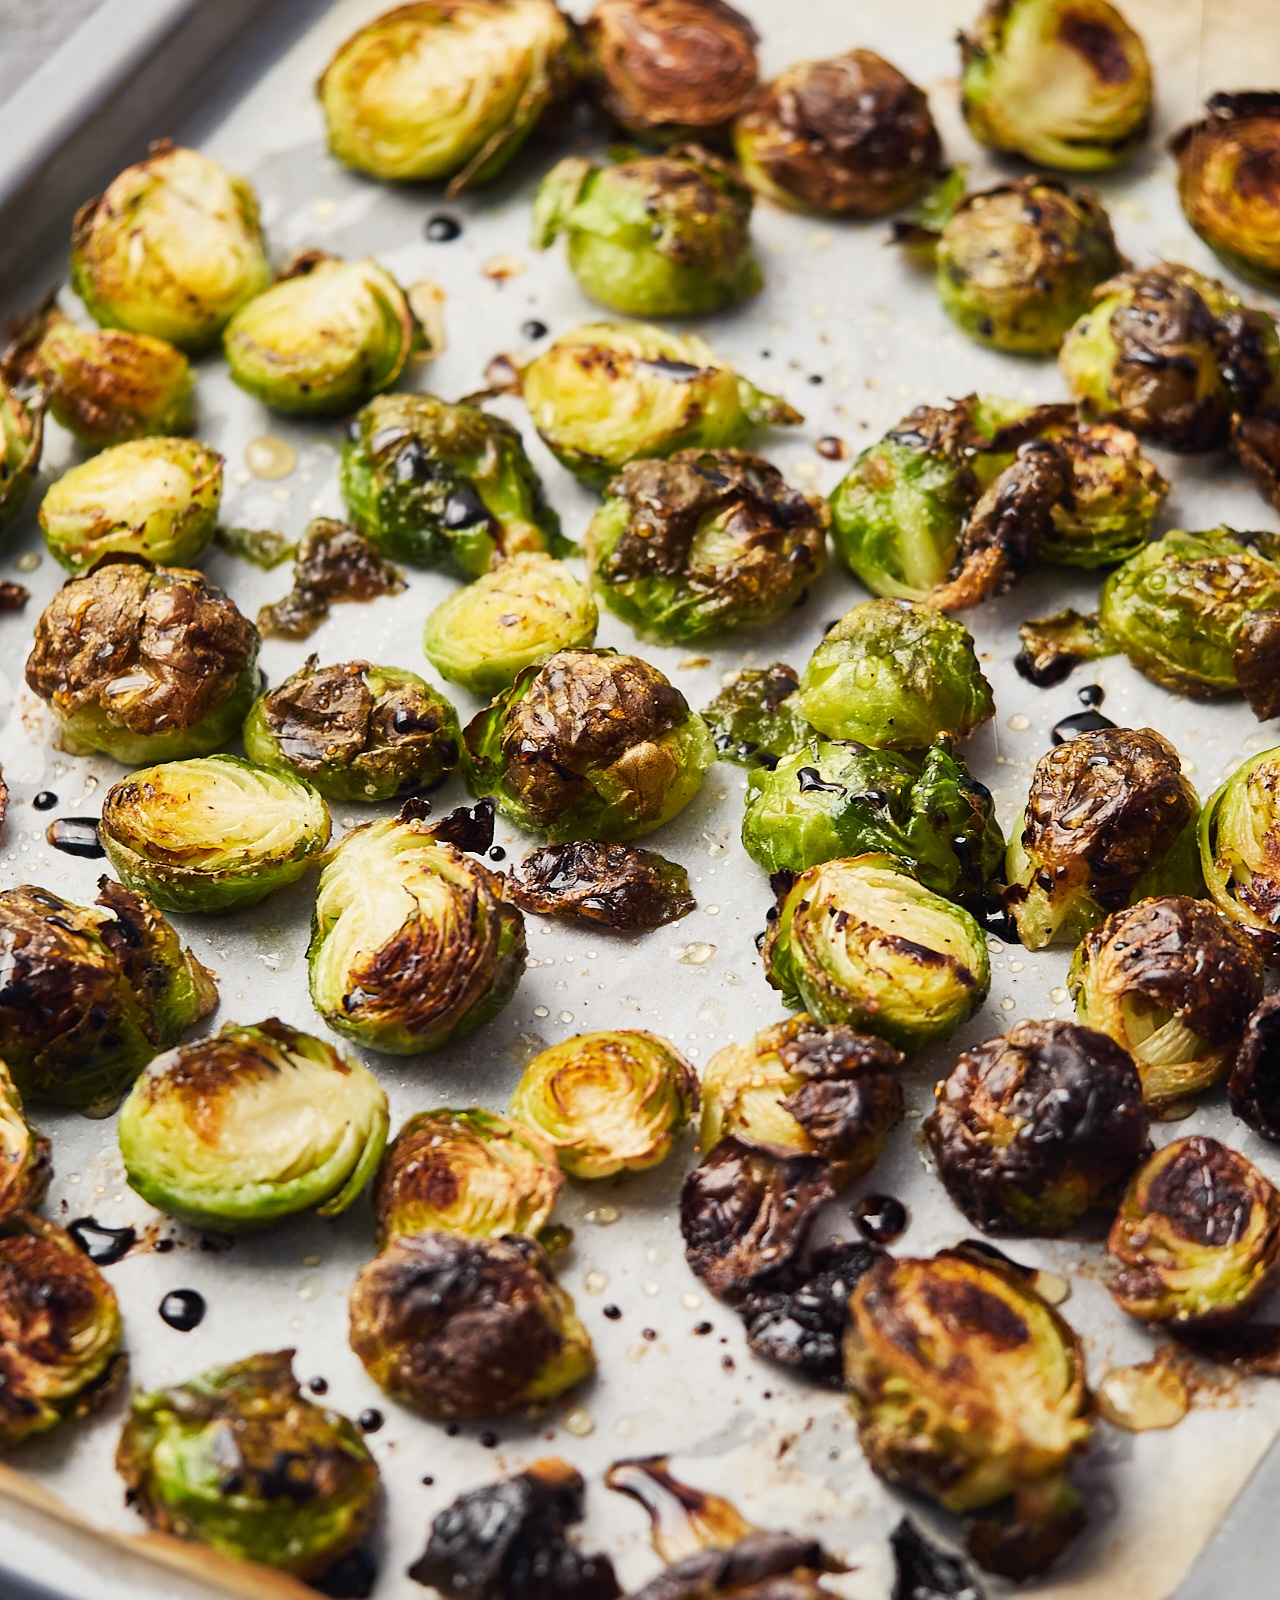 Perfectly Baked Brussel Sprouts - Delice Recipes